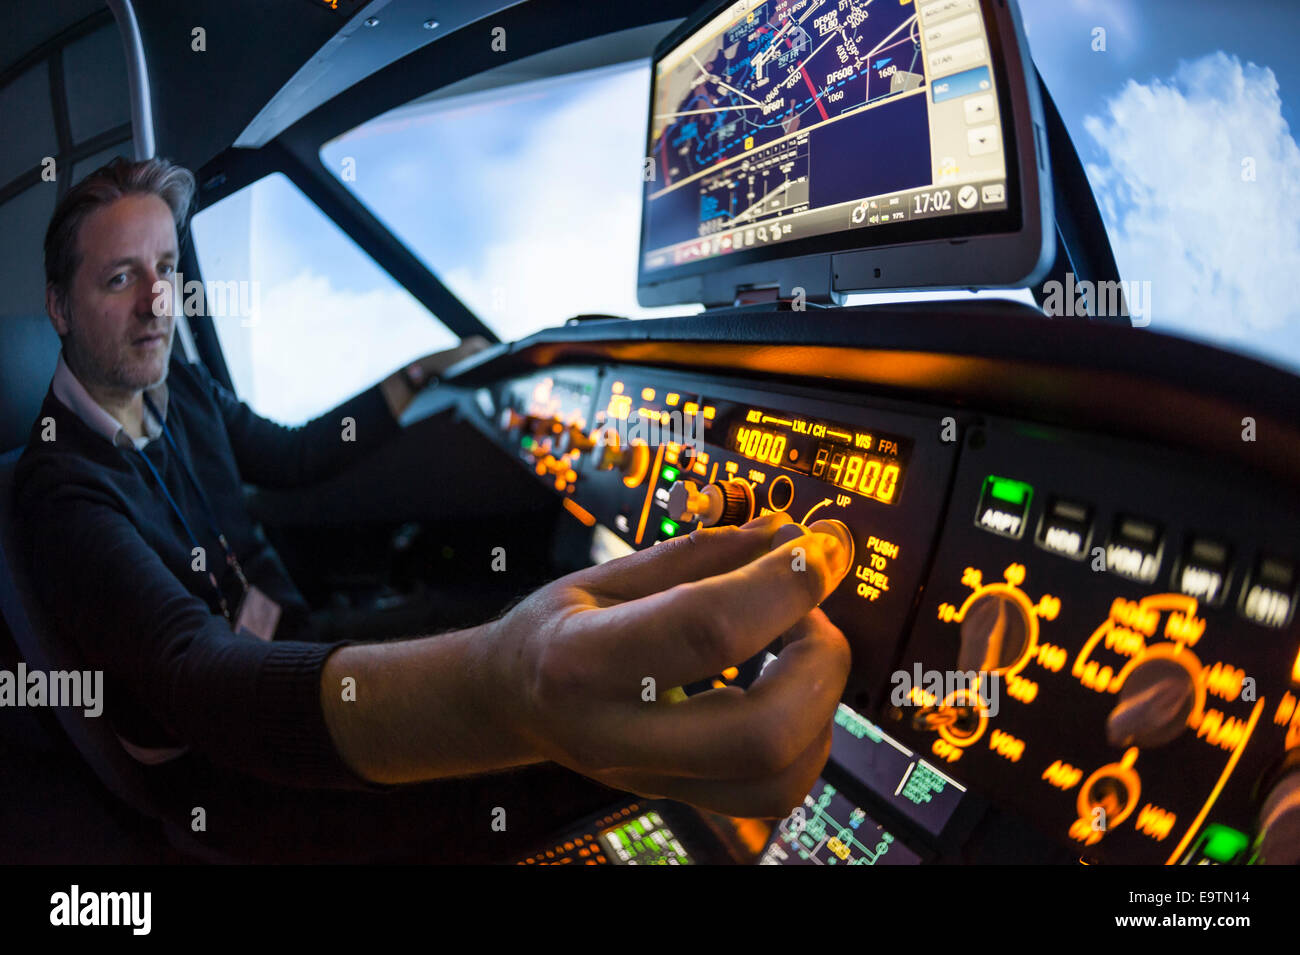 Cockpit of an Airbus A320 flight simulator that is used for training of professional airline pilots (pilot adjusting autopilot) Stock Photo